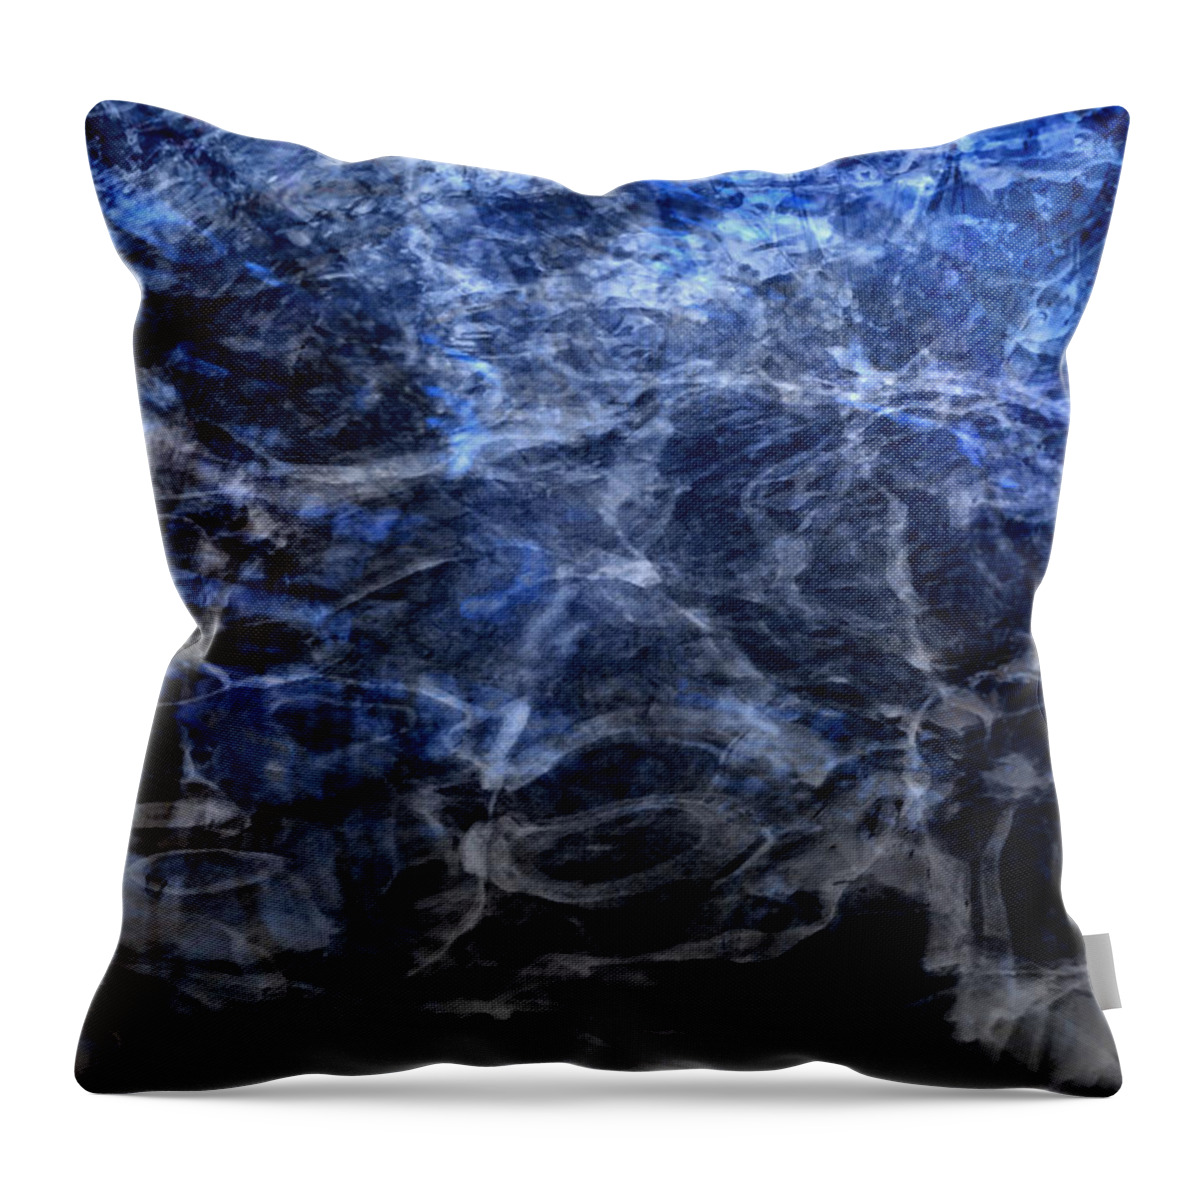 Walter's Falls Throw Pillow featuring the digital art What You Need by Richard Andrews